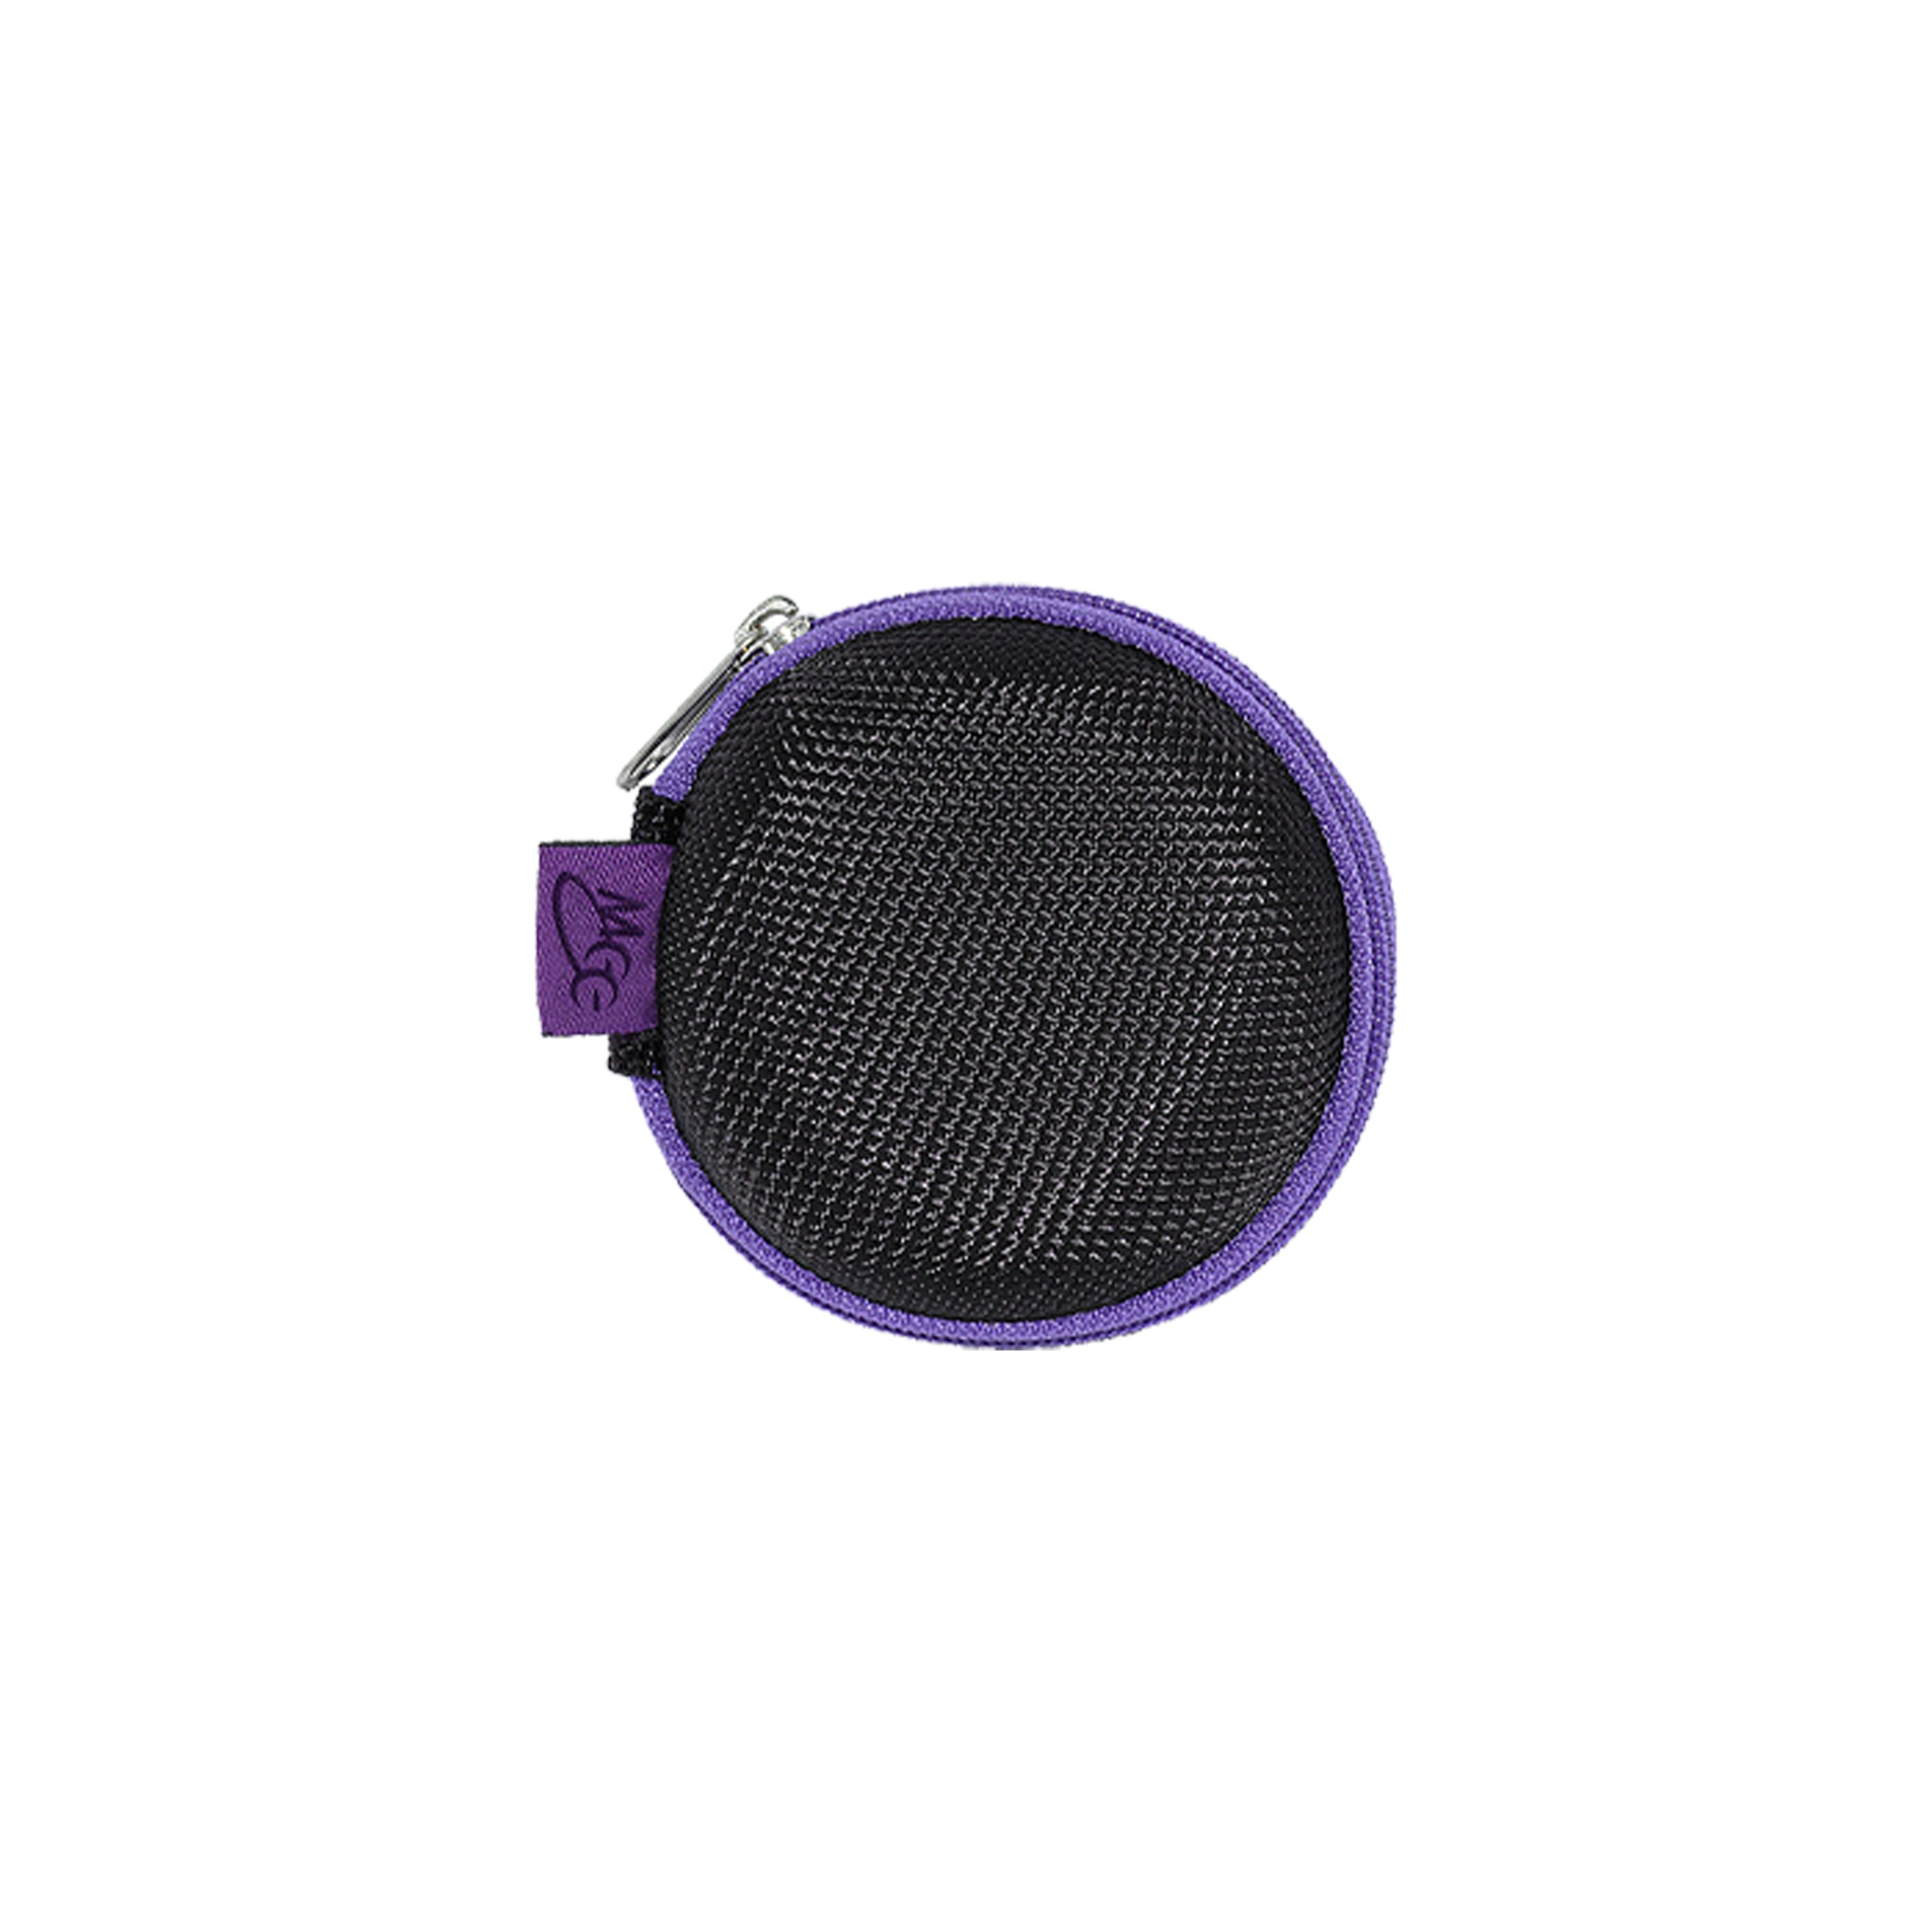 Image of Nylon Round Zippered Carrying Case for Earphones.